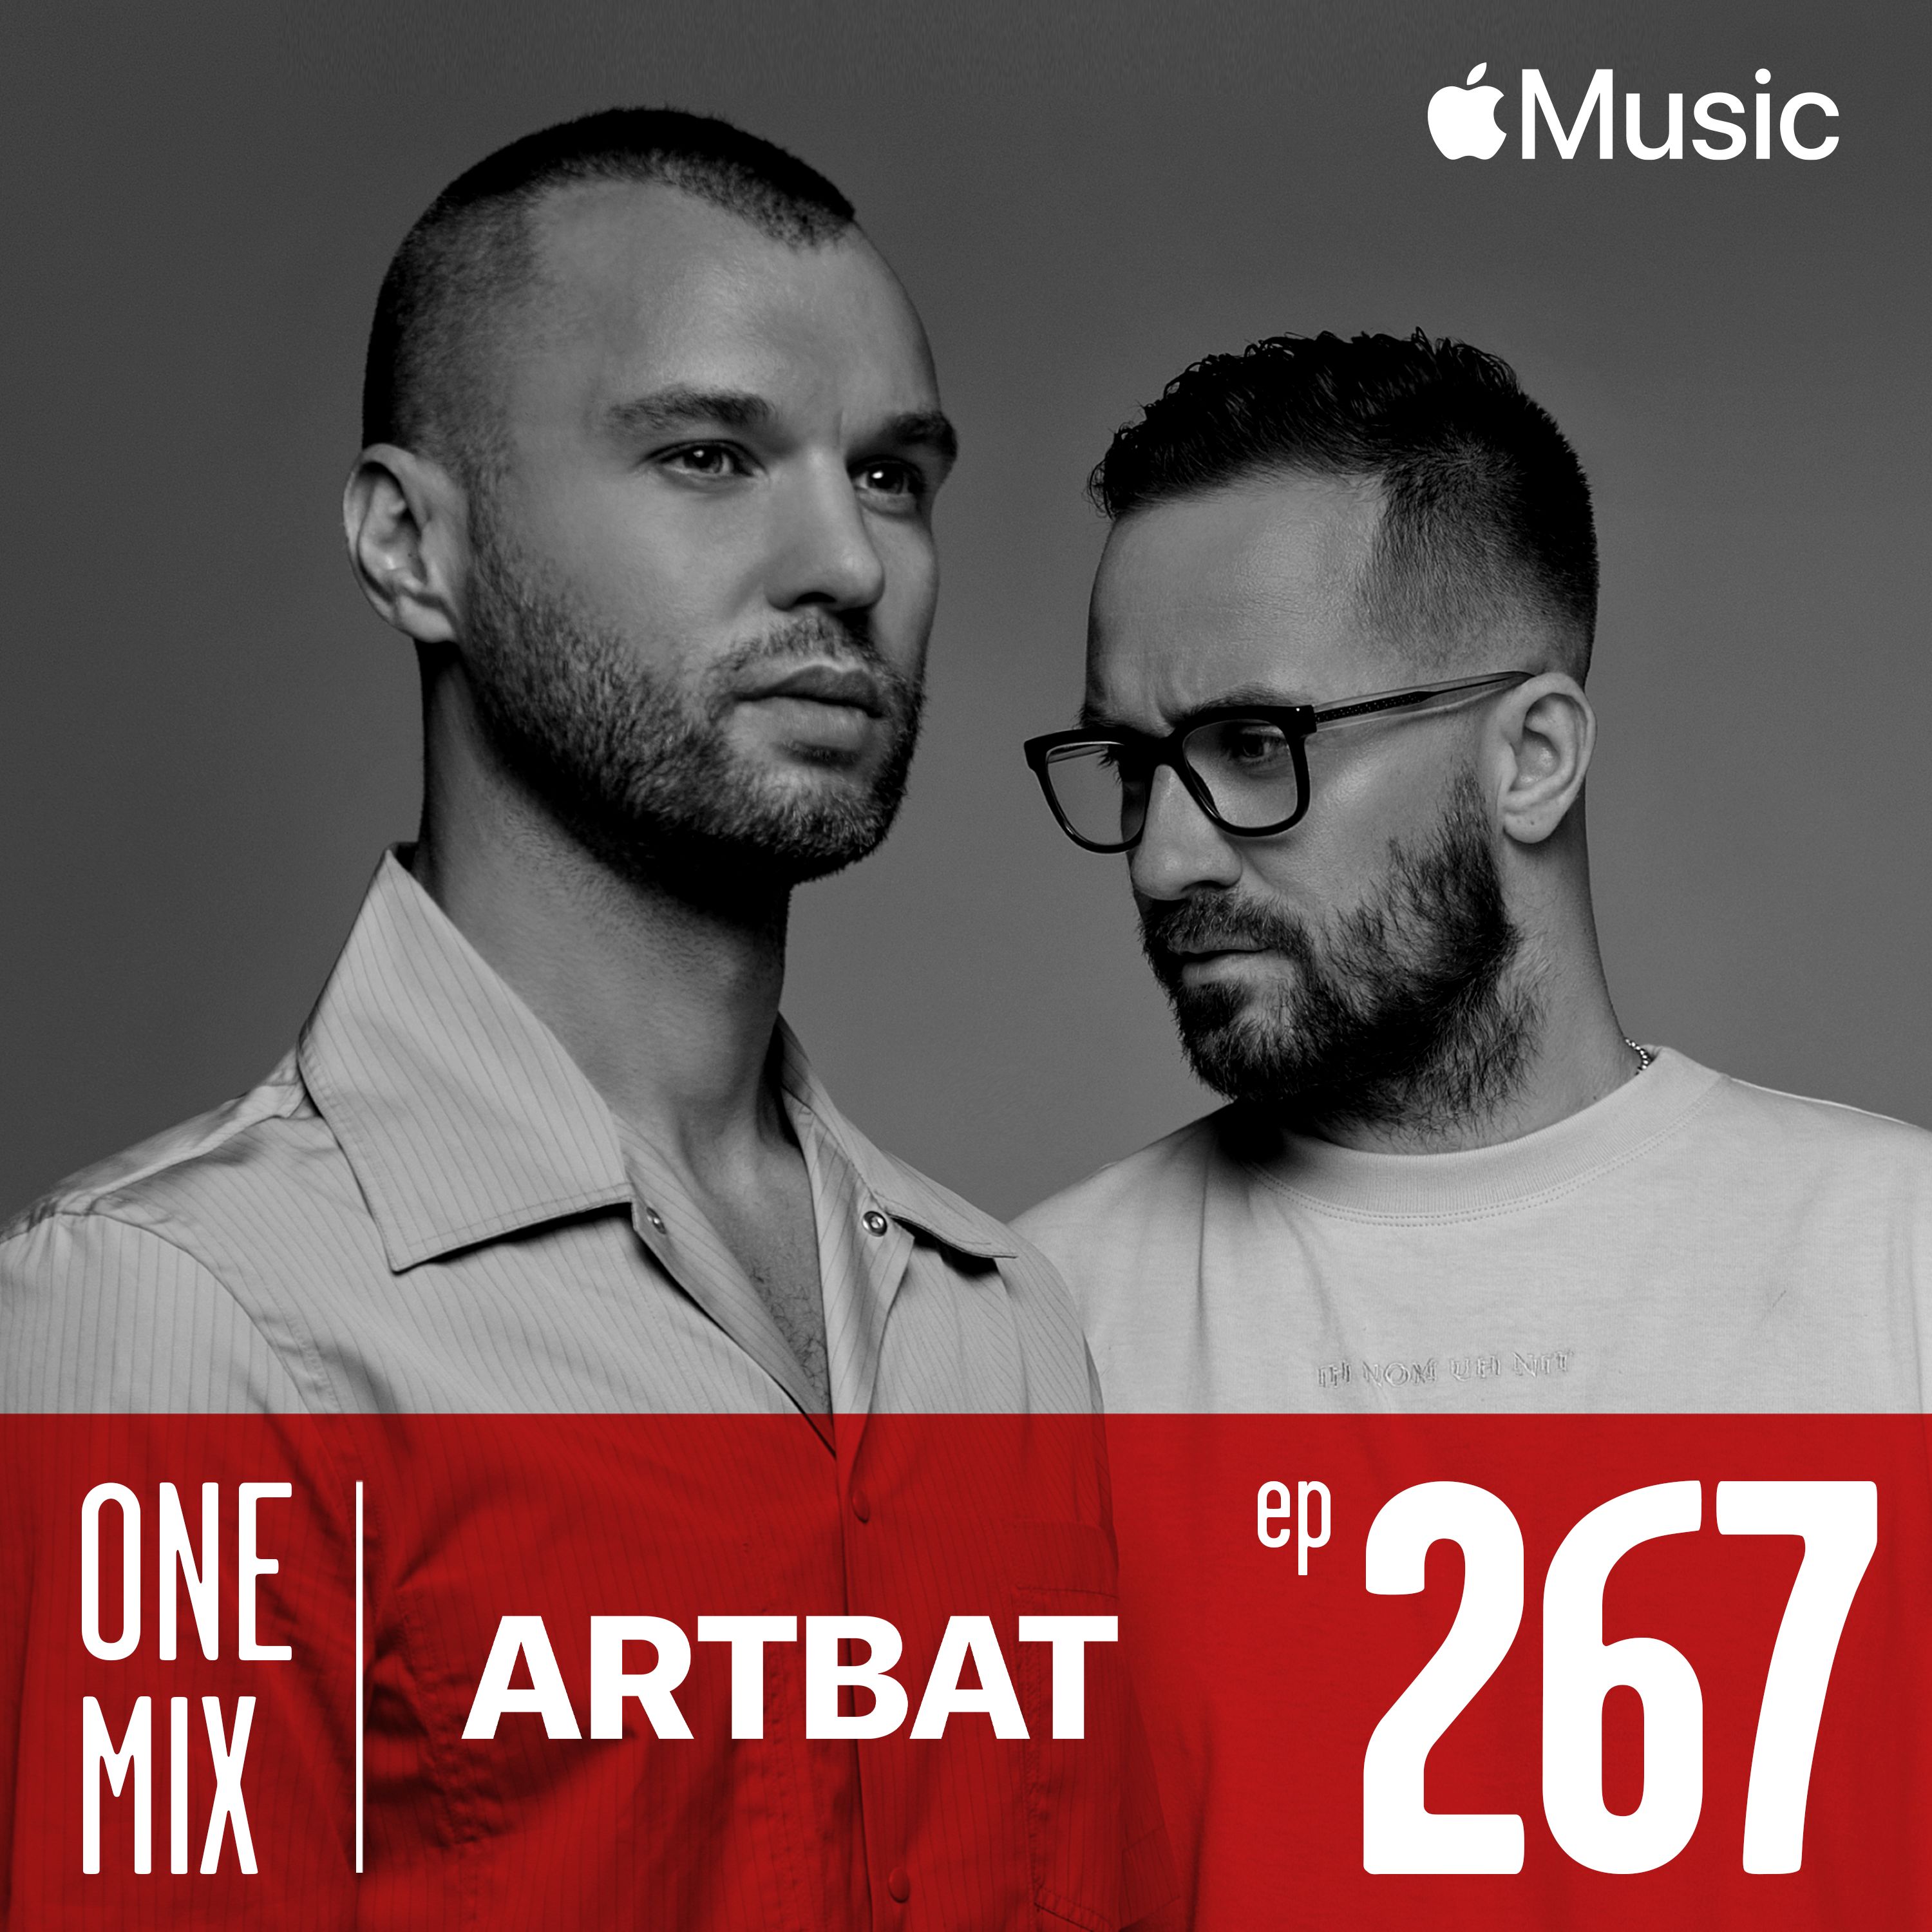 Download One Mix with ARTBAT | #267 Apple Music